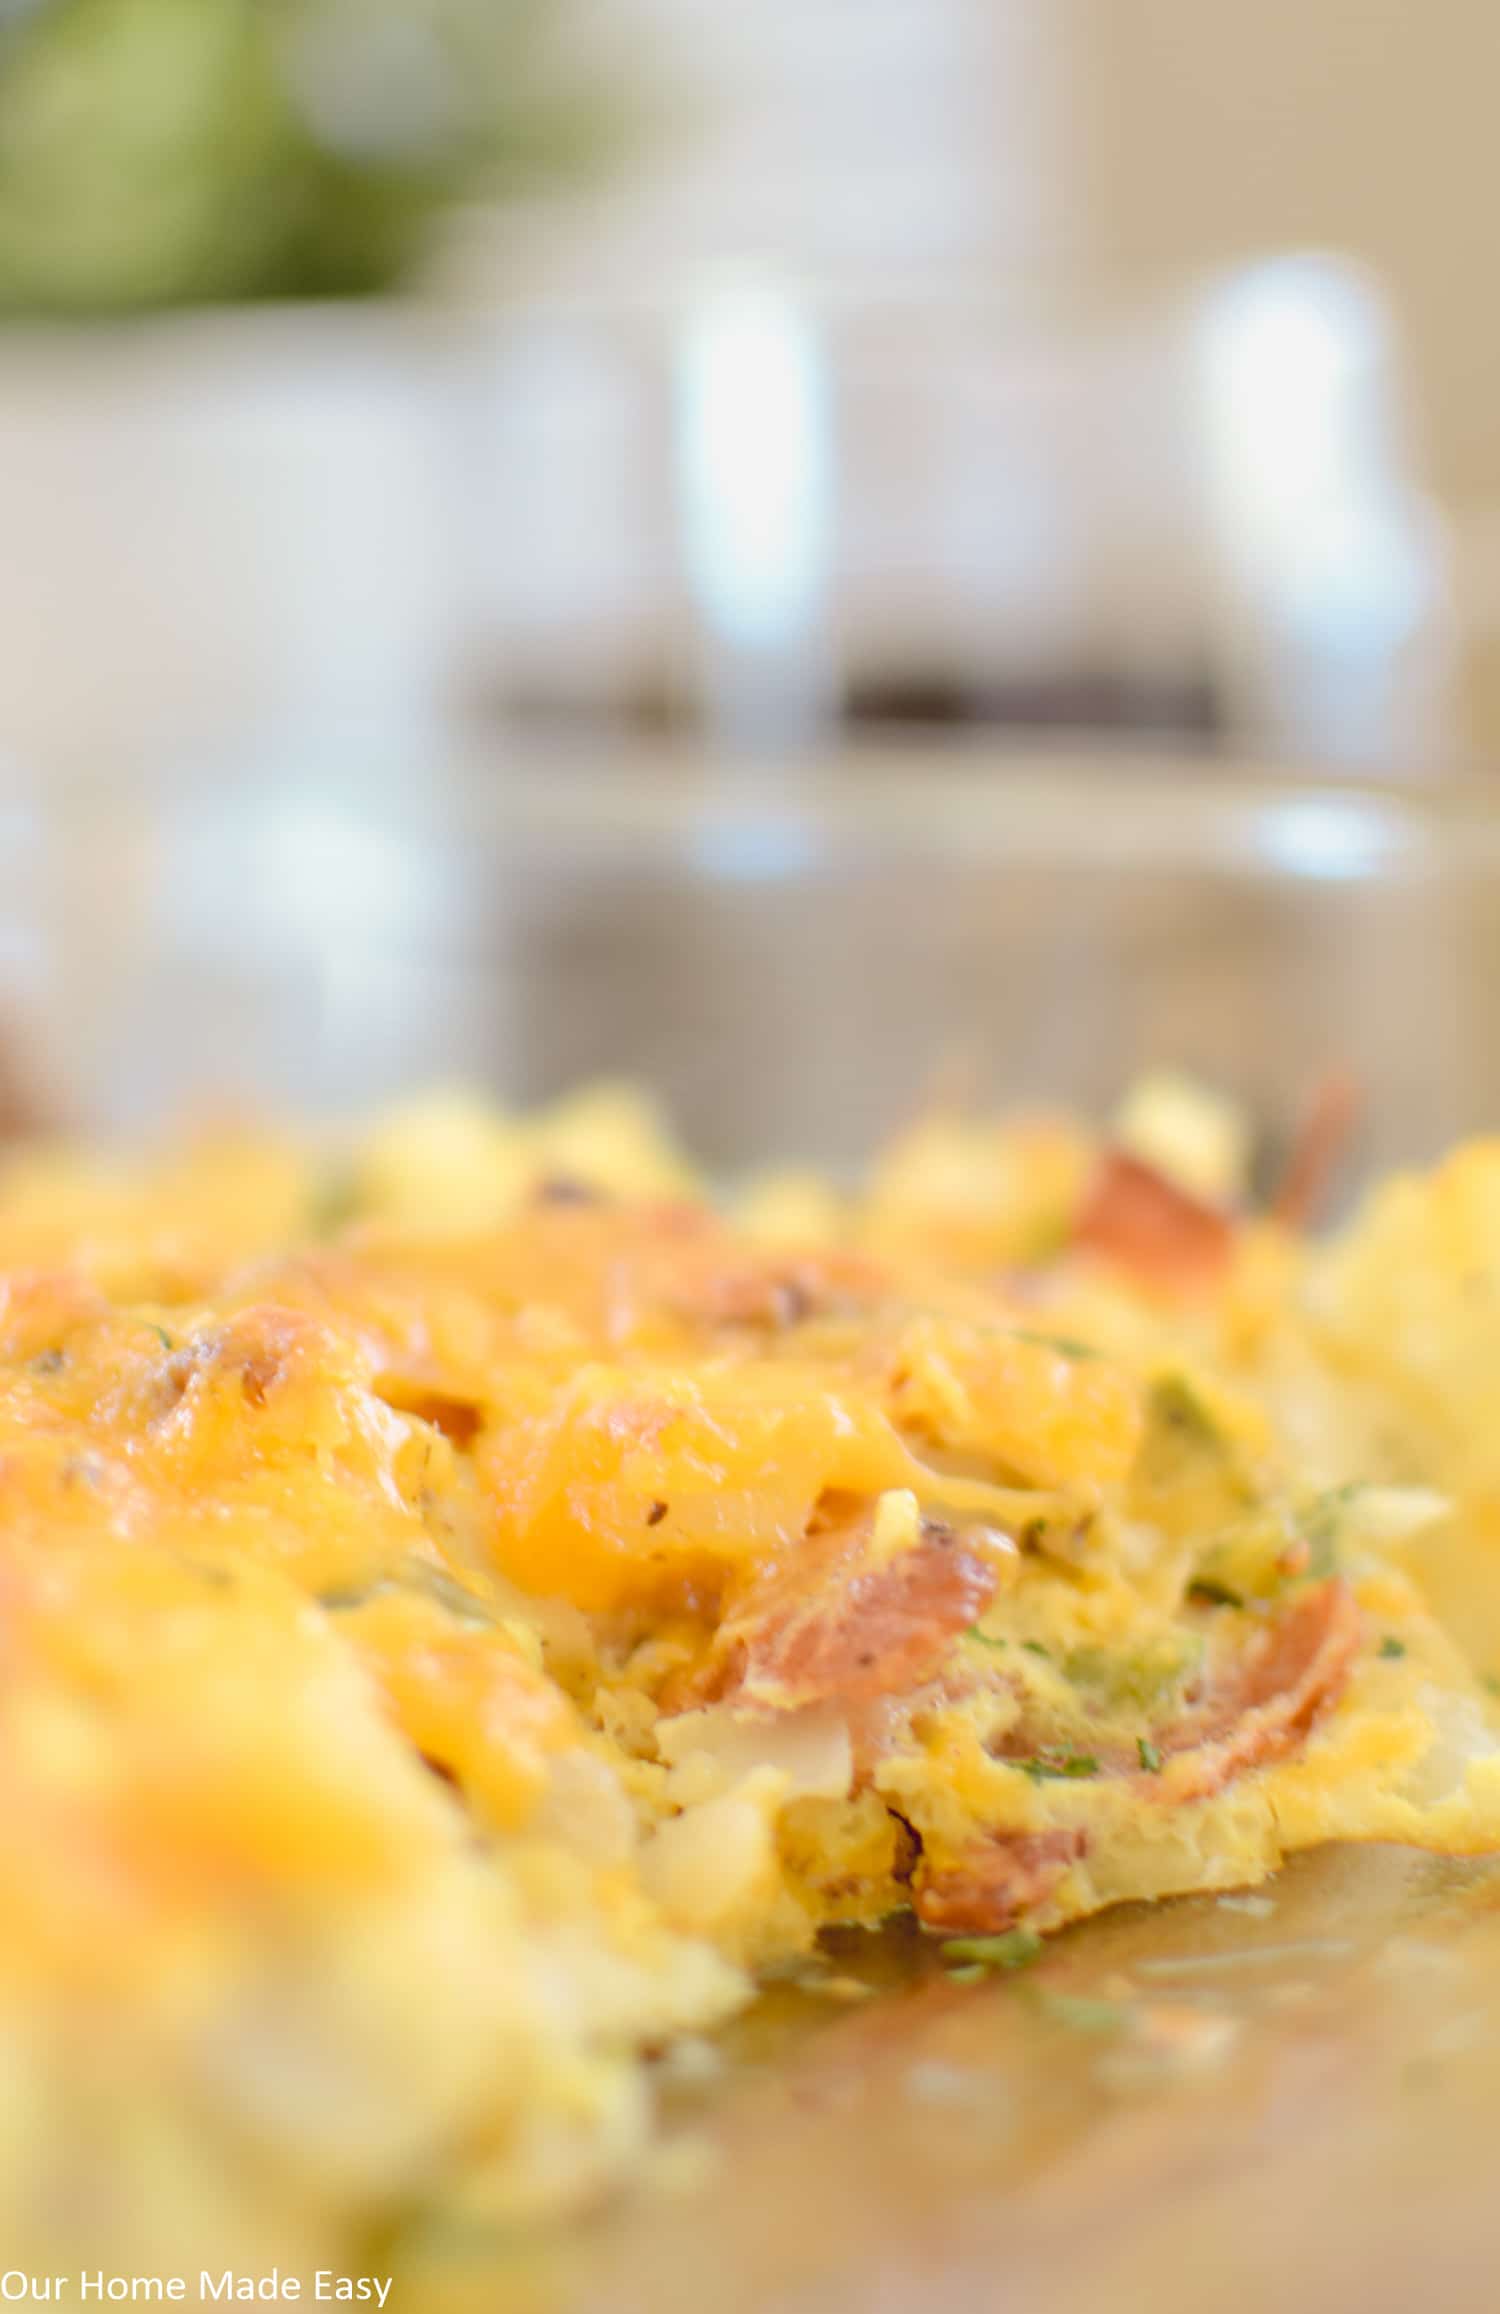 This simple make-ahead breakfast casserole is the perfect Christmas morning breakfast